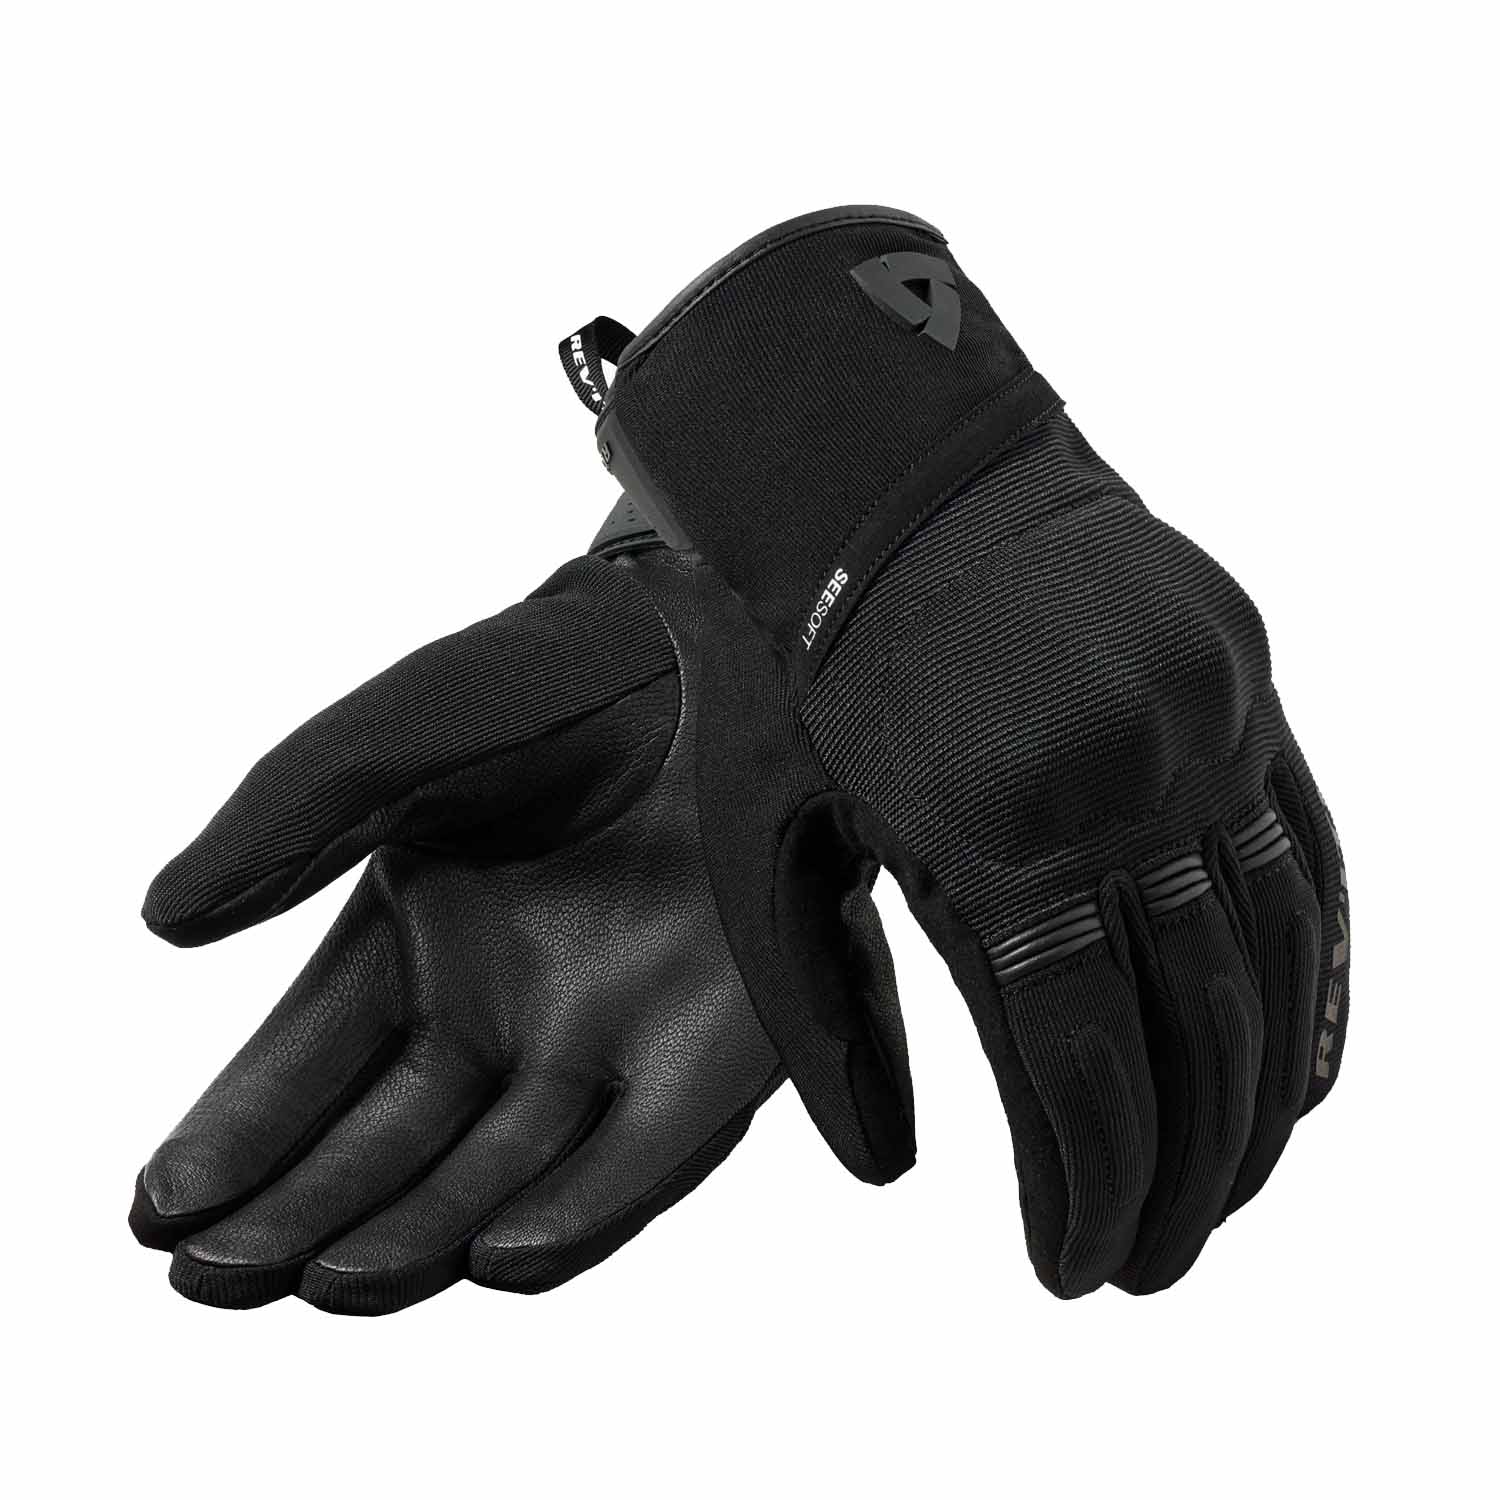 Image of REV'IT! Mosca 2 H2O Gloves Black Talla XS